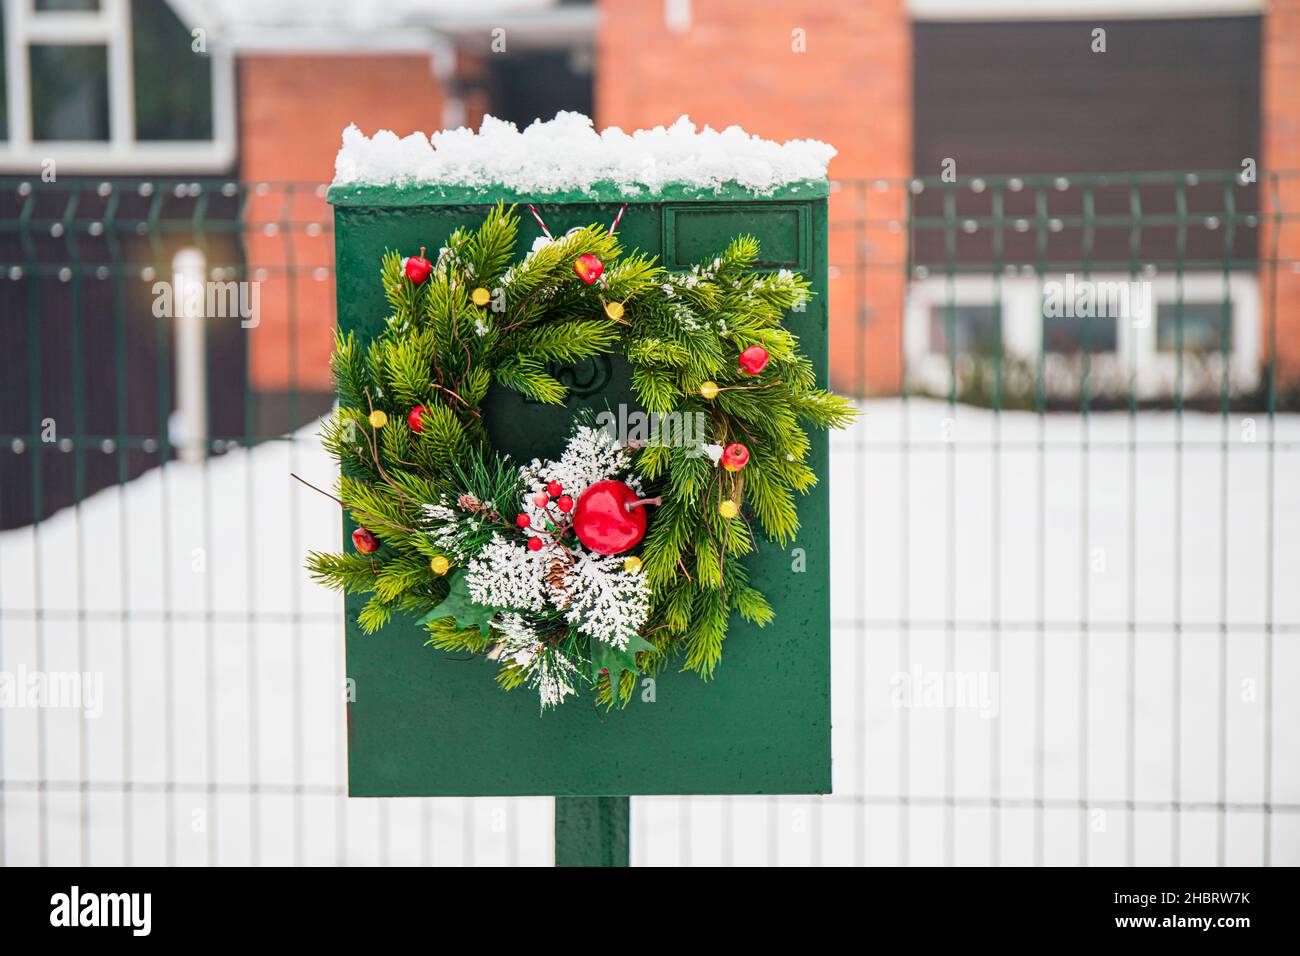 Domestic mail box decorated with spruce tree Christmas wreath outdoors in snowy winter day. Holiday moods. Stock Photo